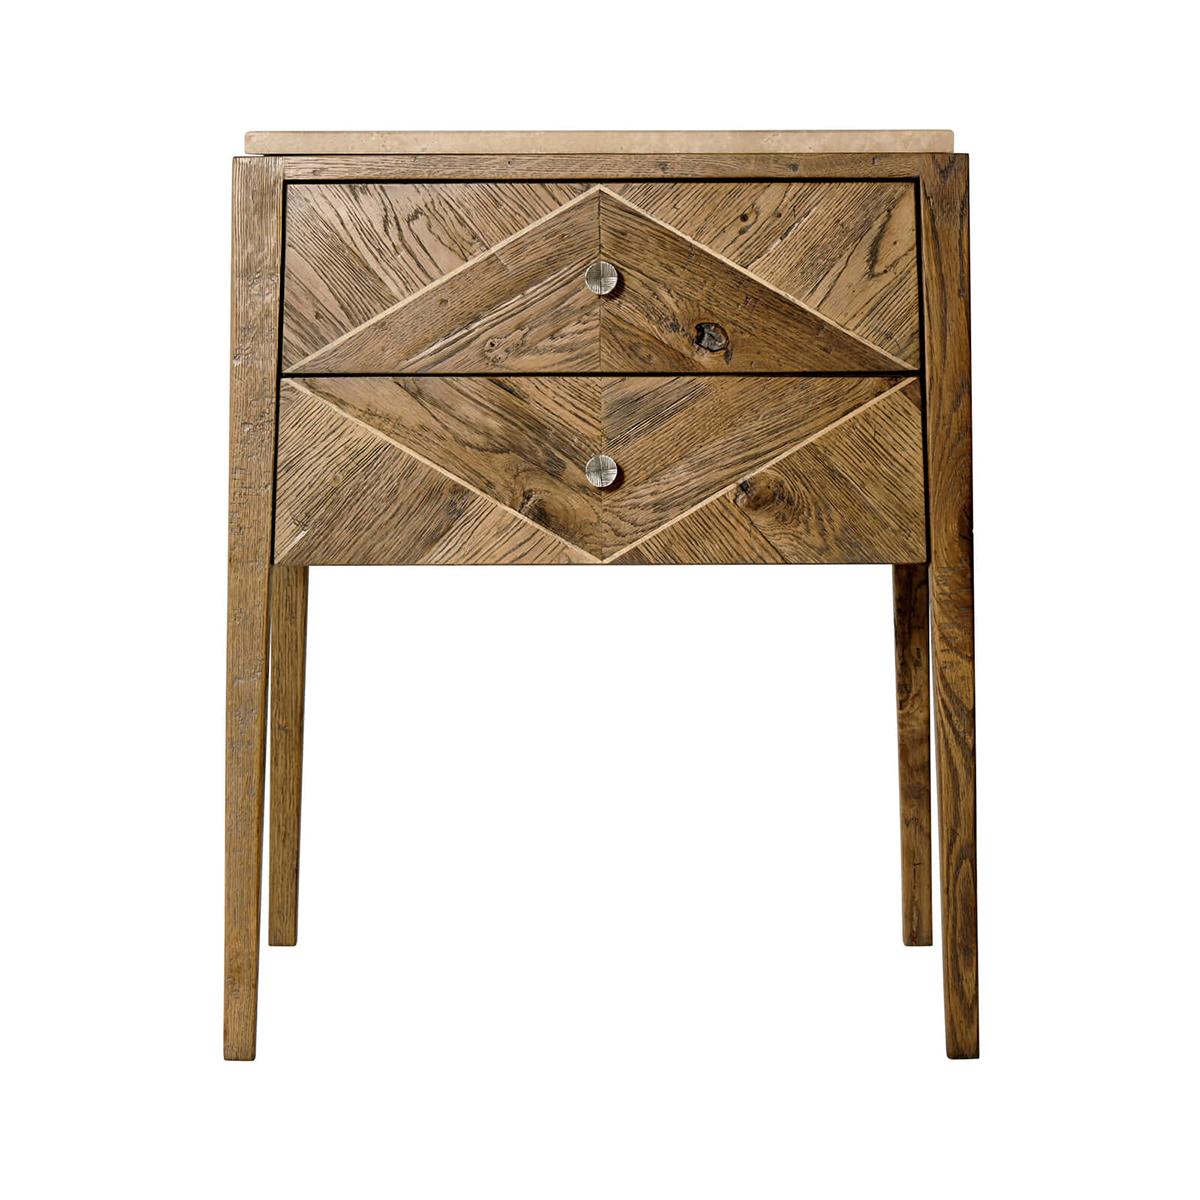 Rustic oak parquetry bedside table with a honed travertine top, oak chevron parquetry decoration in our echoe oak finish with two drawers and textured 'vintage' metal handles on square tapered splayed legs.

Dimensions: 23.5